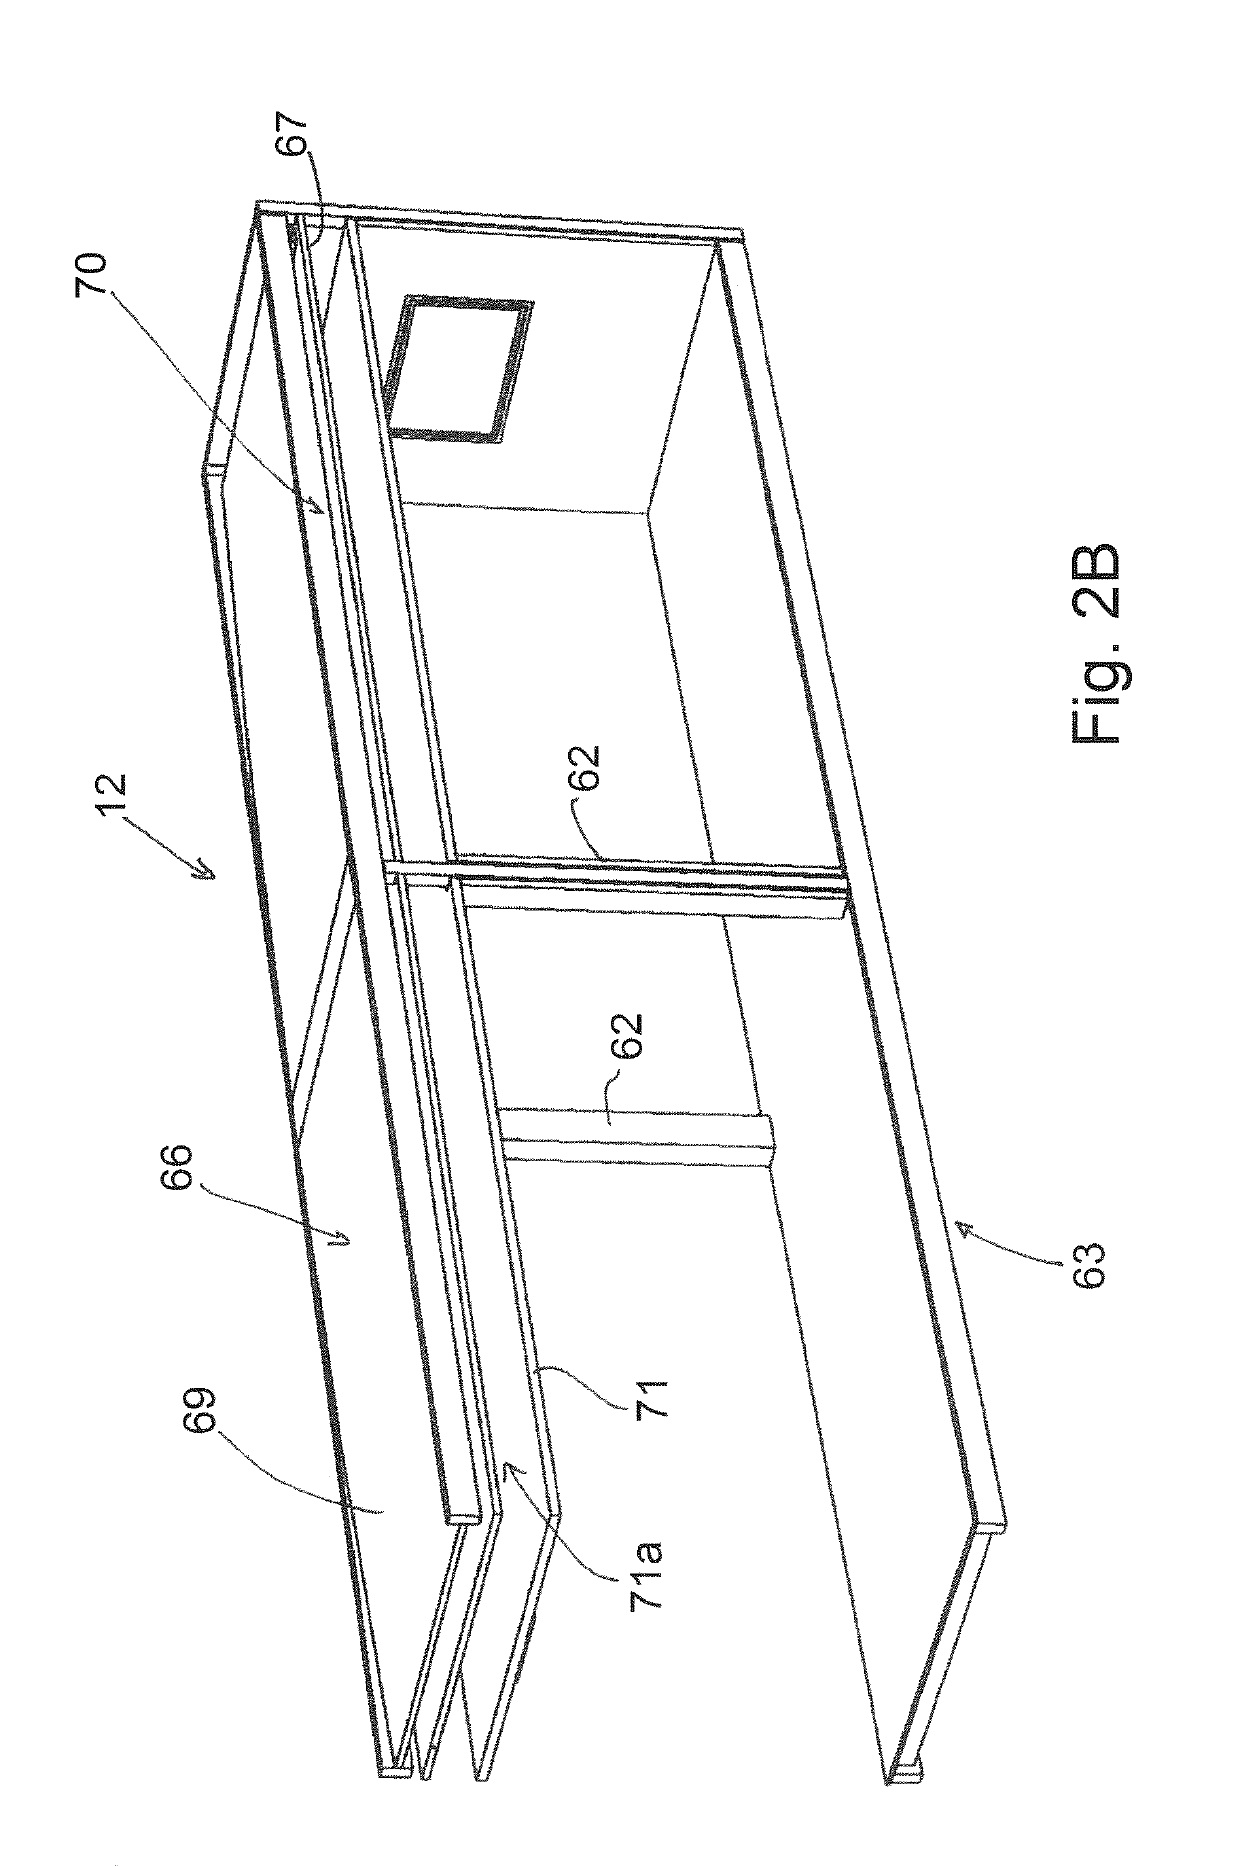 Self-contained treatment unit for haemodialysis treatments